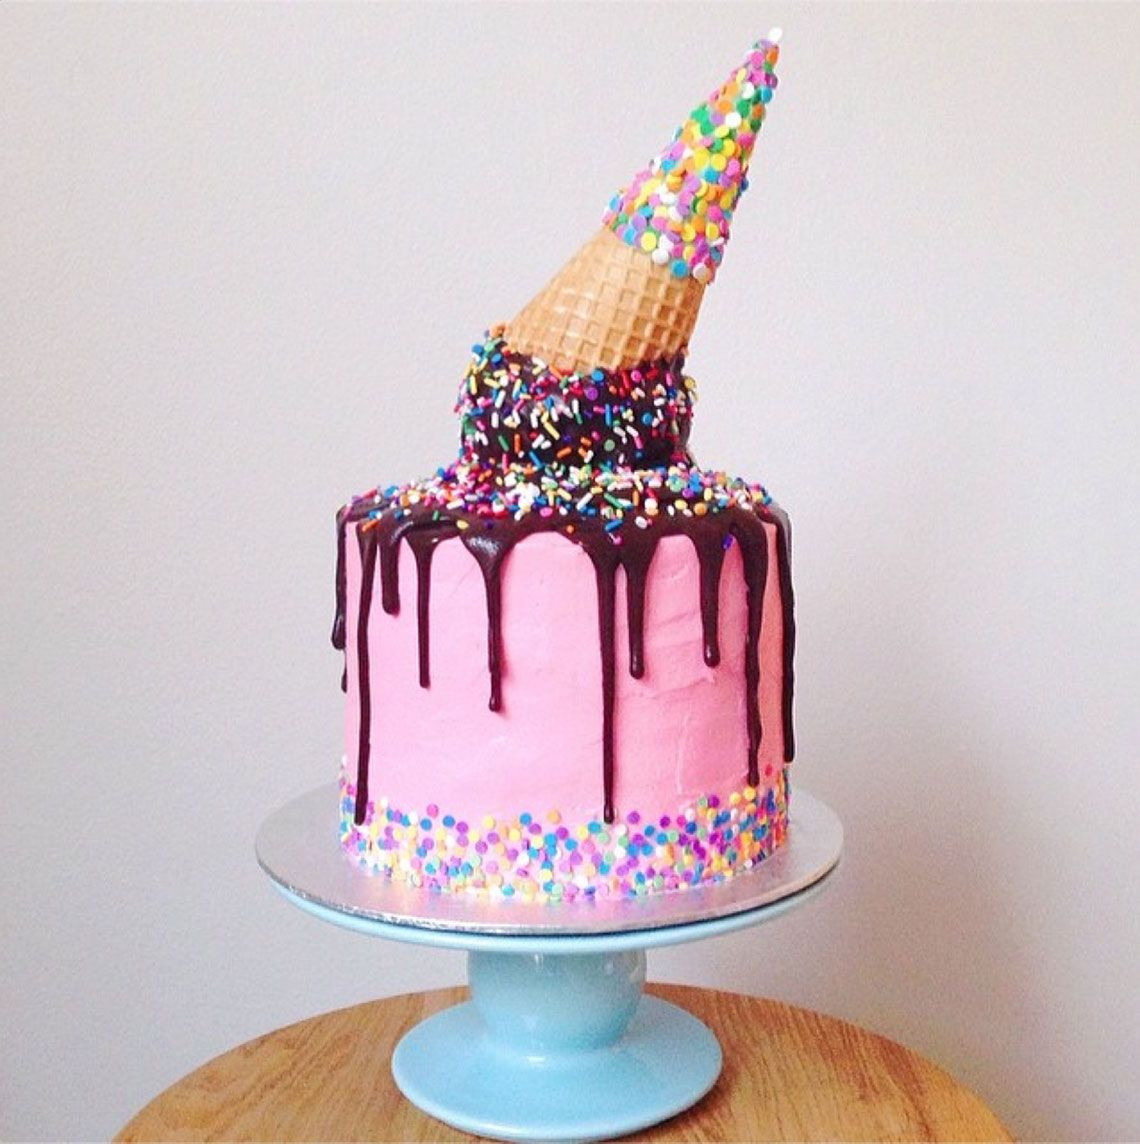 Ice Cream Birthday Cake
 How amazing is this melted ice cream cone cake by Sugar